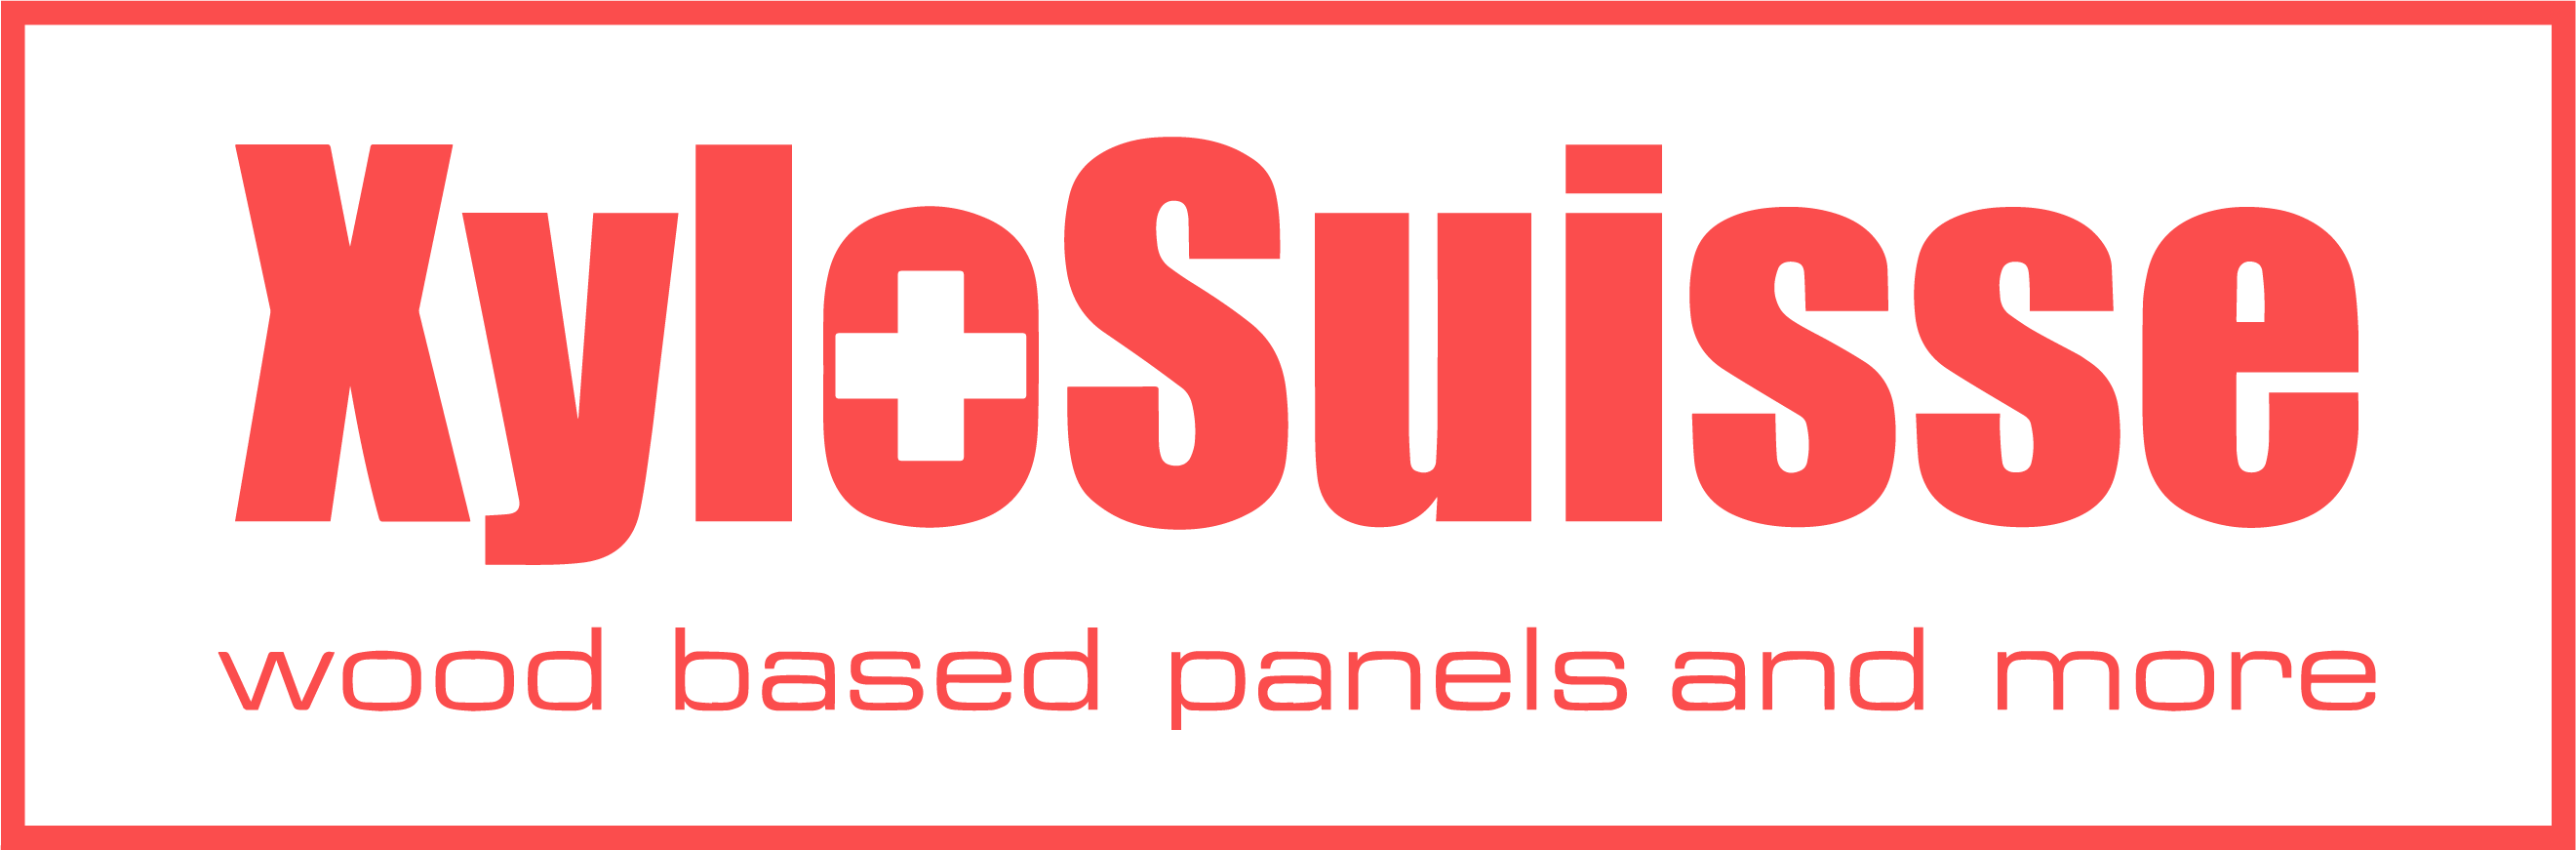 http://xylosuisse.ru/wp-content/uploads/2018/07/xyloswiss_logo-to-change-1.png